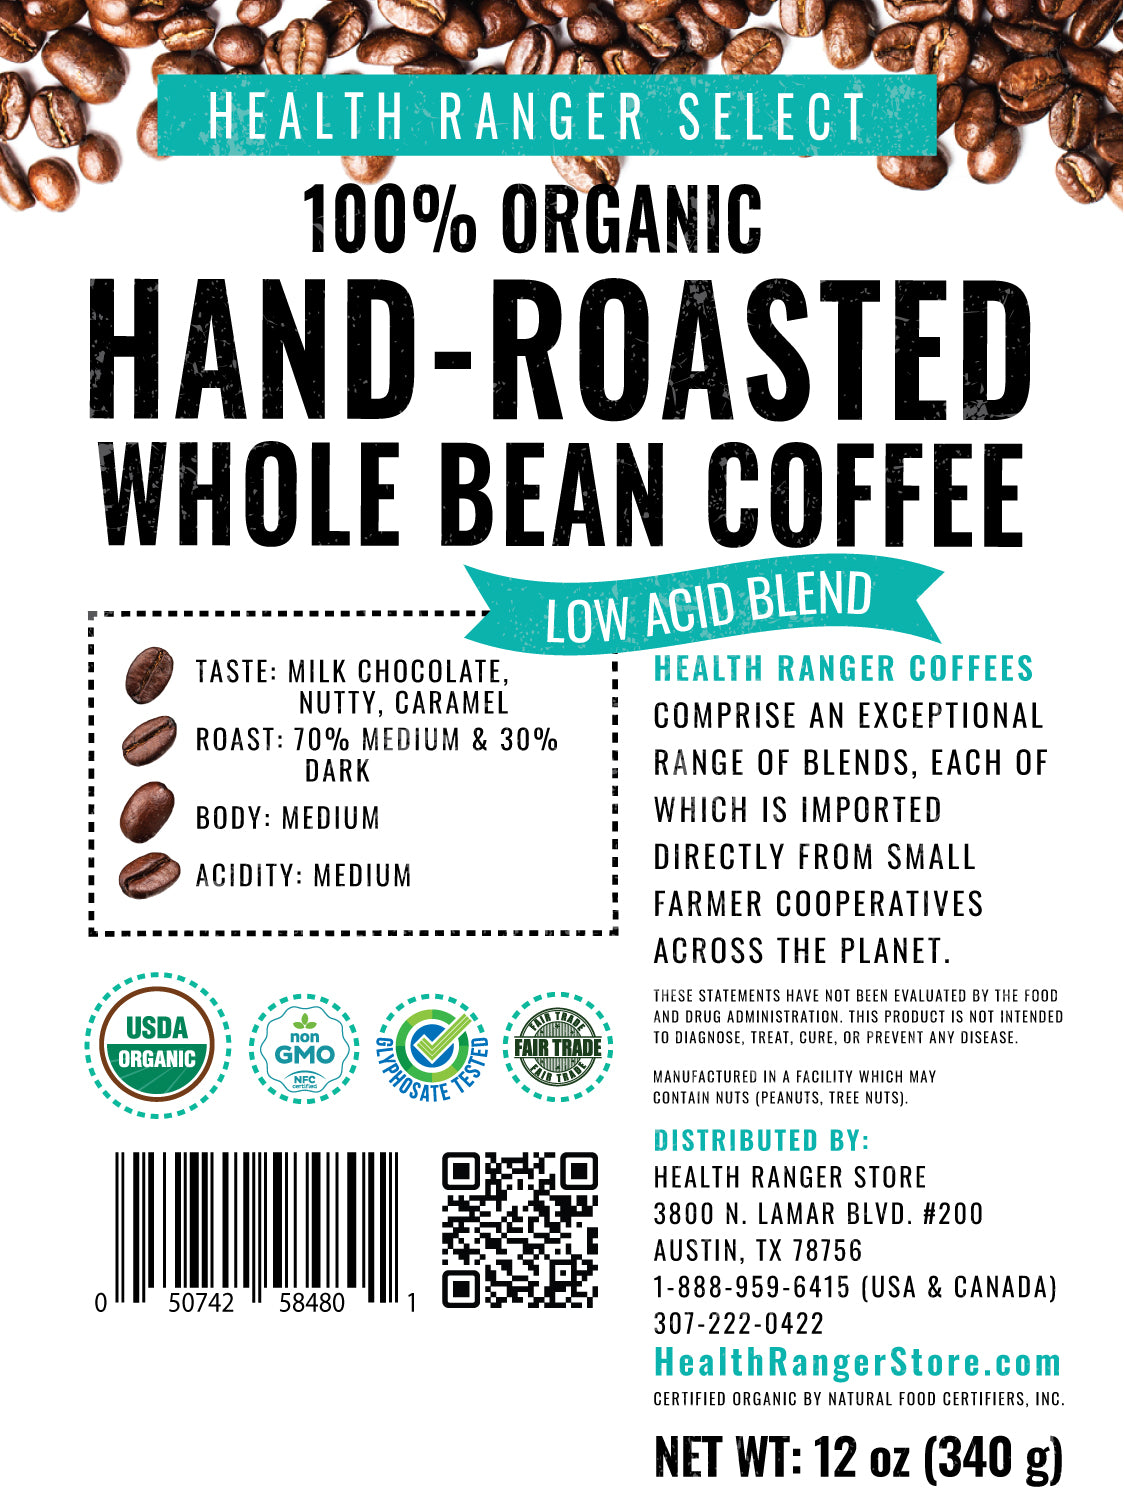 100% Organic Hand-Roasted Whole Bean Coffee (Low Acid Blend) 12oz, 340g (6-Pack)